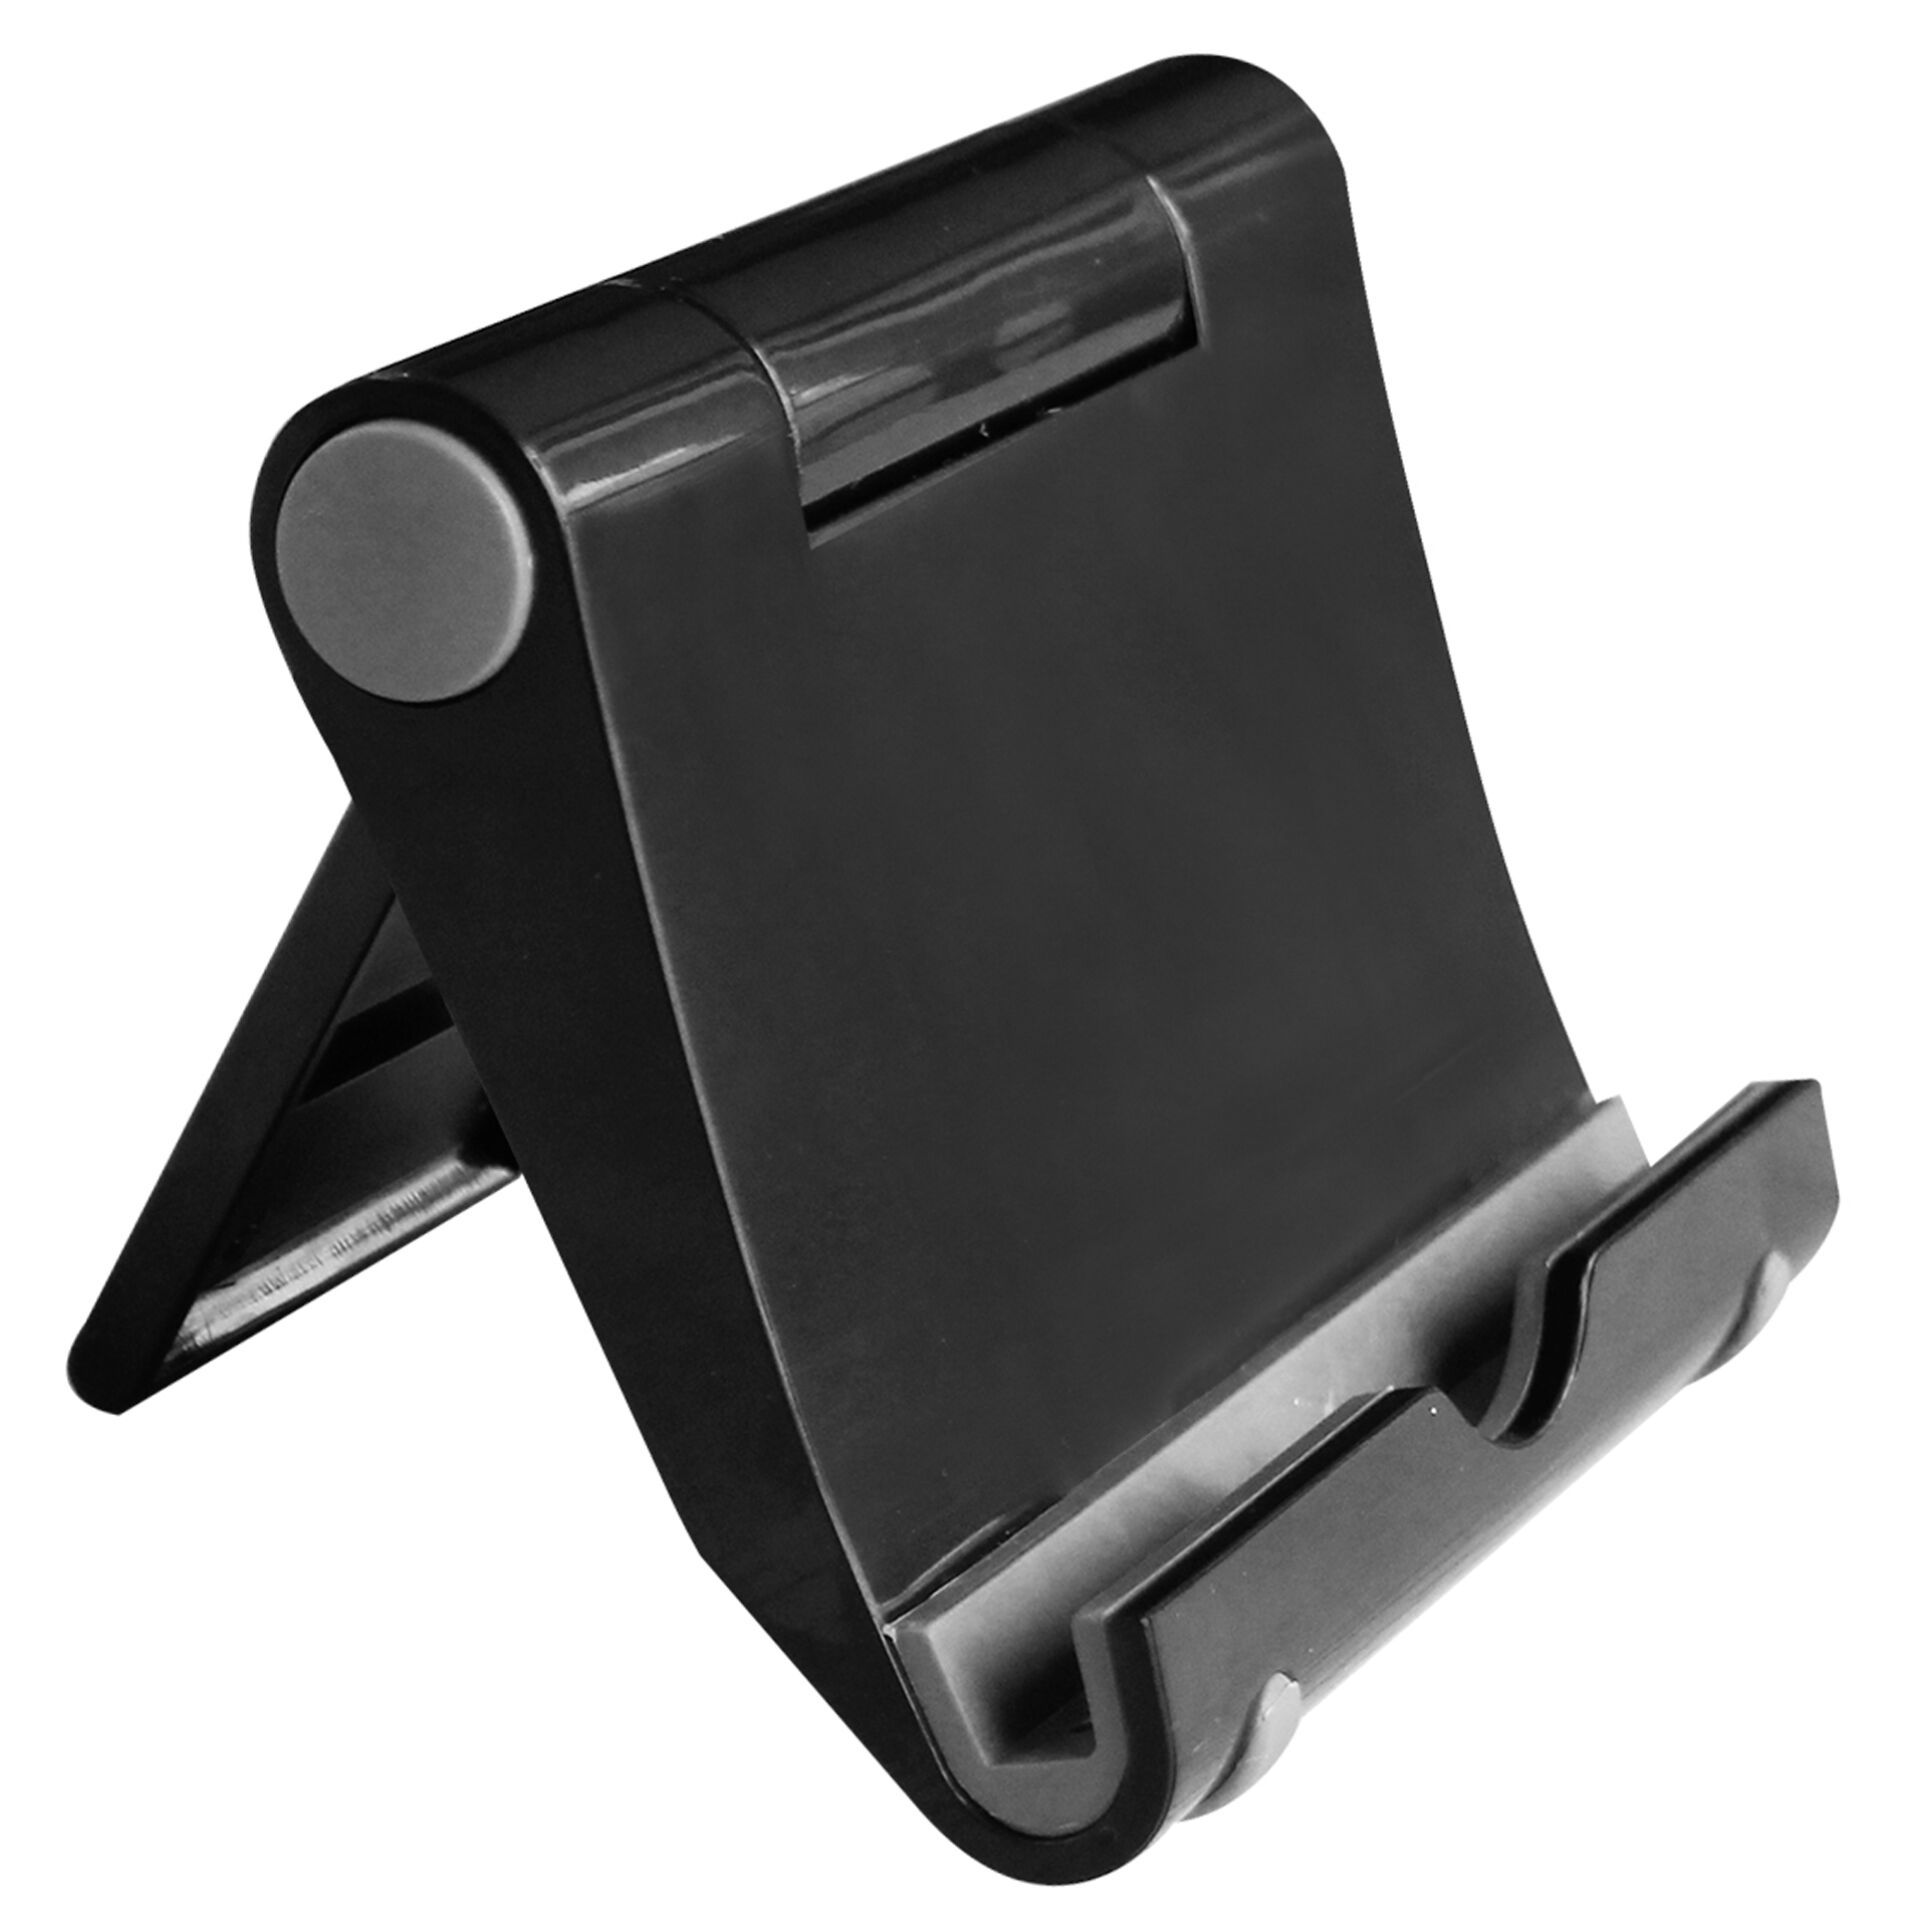 Reflecta Tabula Travel universal Tablet and Smartphone Stand